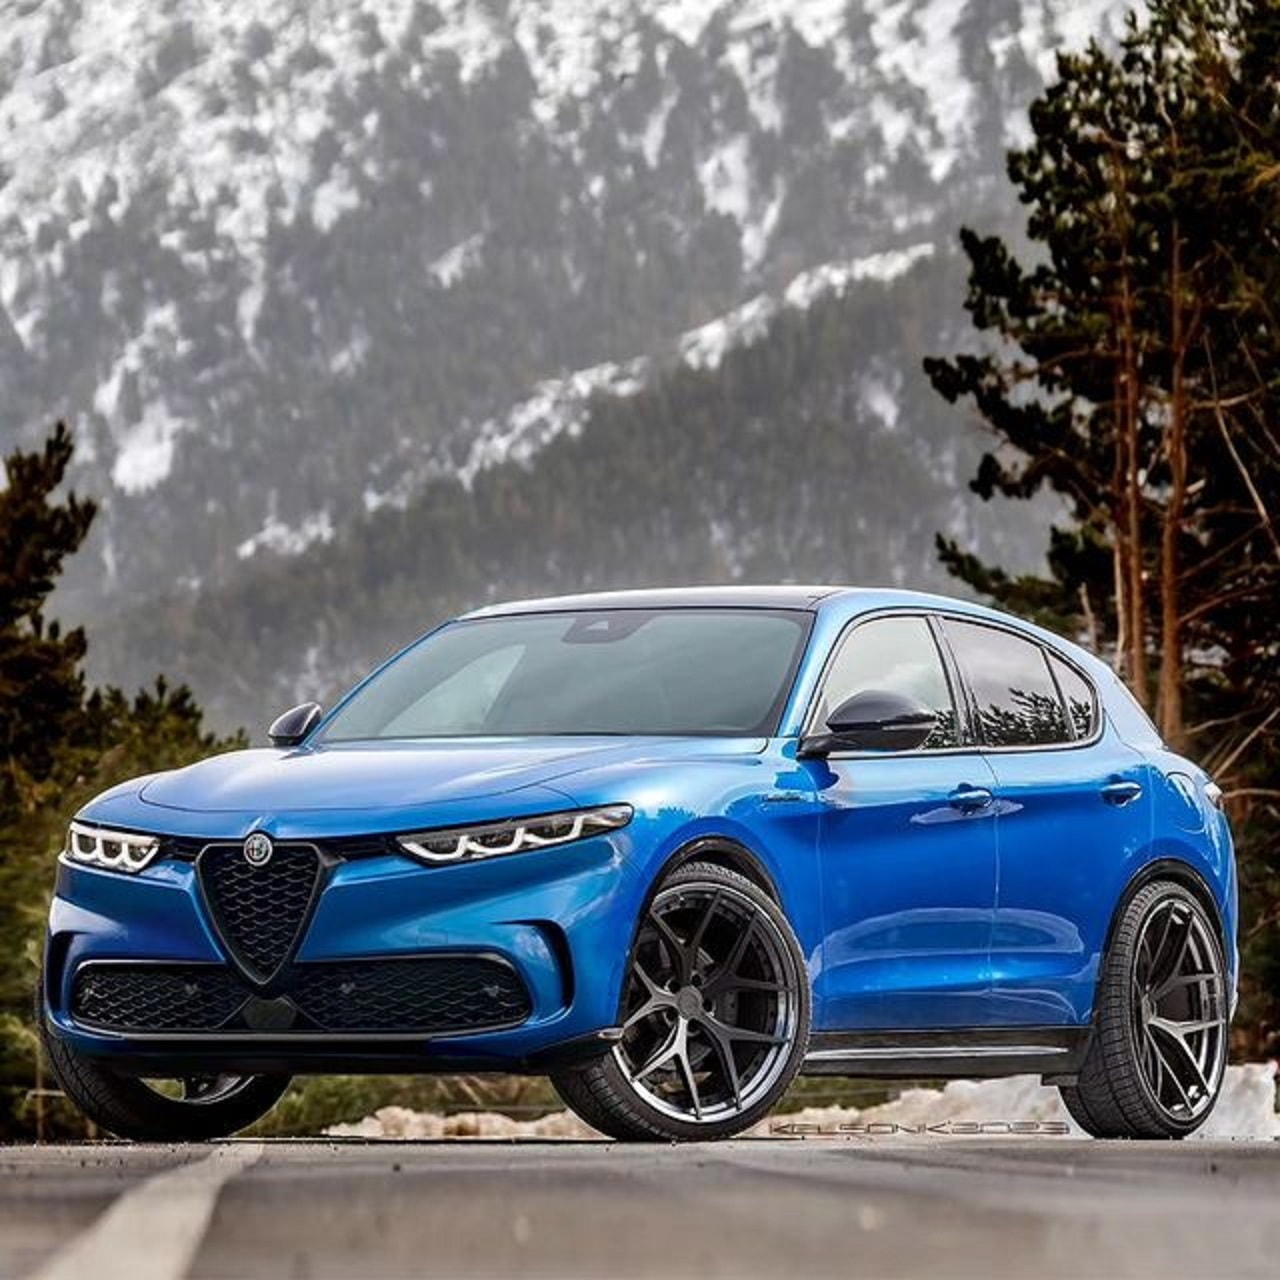 Alfa Romeo Stelvio Gets a Second Facelift in Another Nation